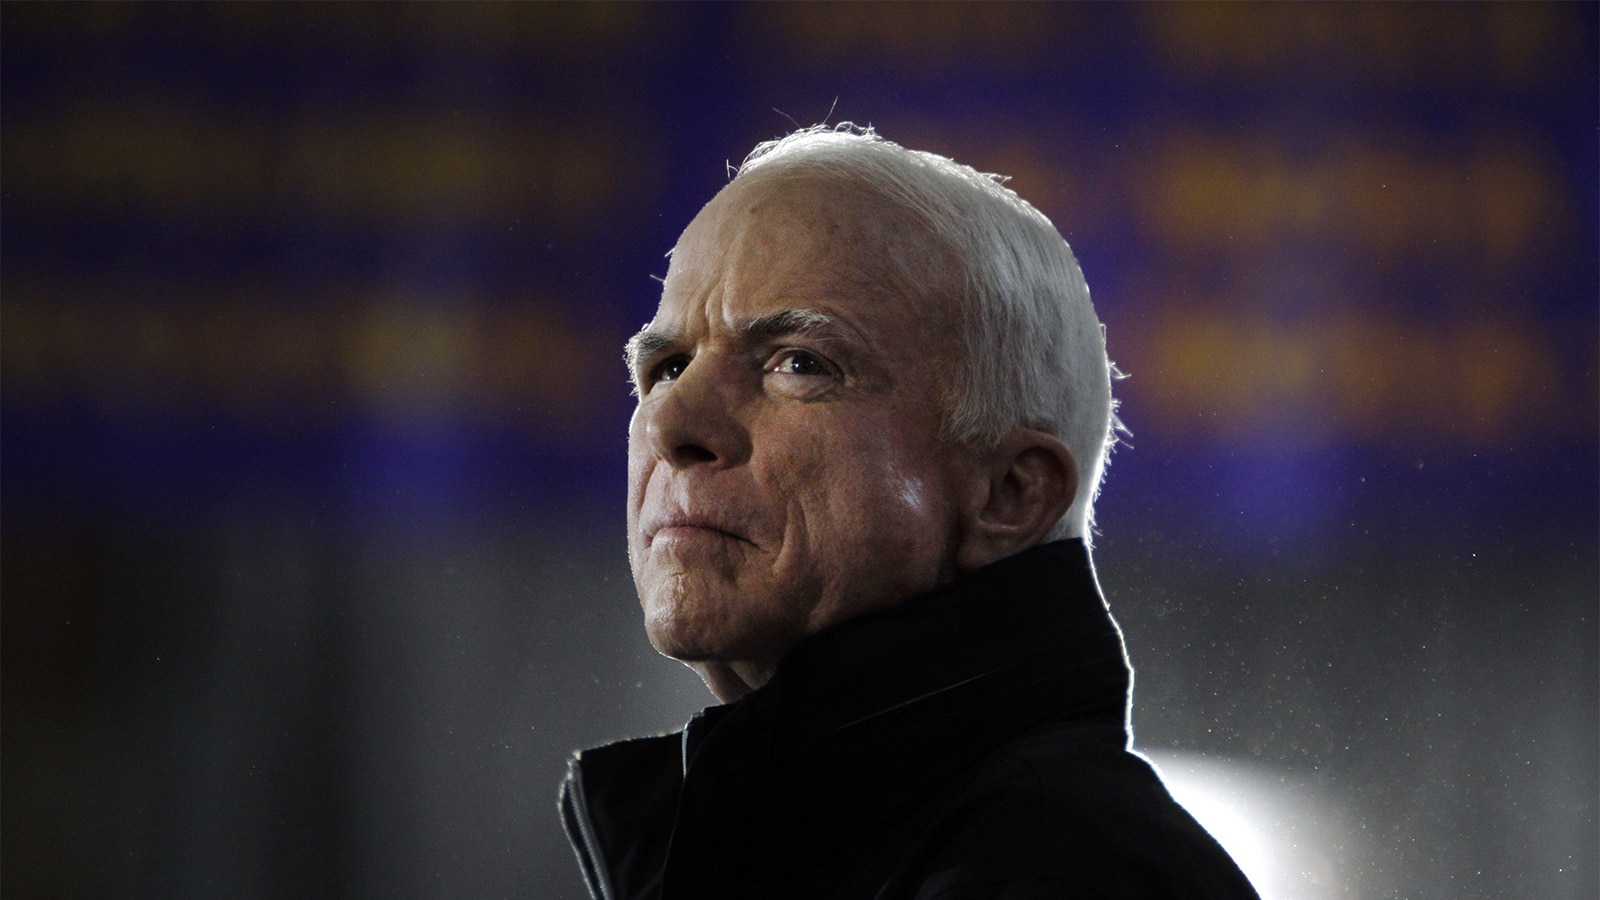 Sen. John McCain waits as he is introduced to speak at a rally in Cedar Falls, Iowa, on Oct. 26, 2008. McCain died Aug. 25, 2018. (AP Photo/Carolyn Kaster)